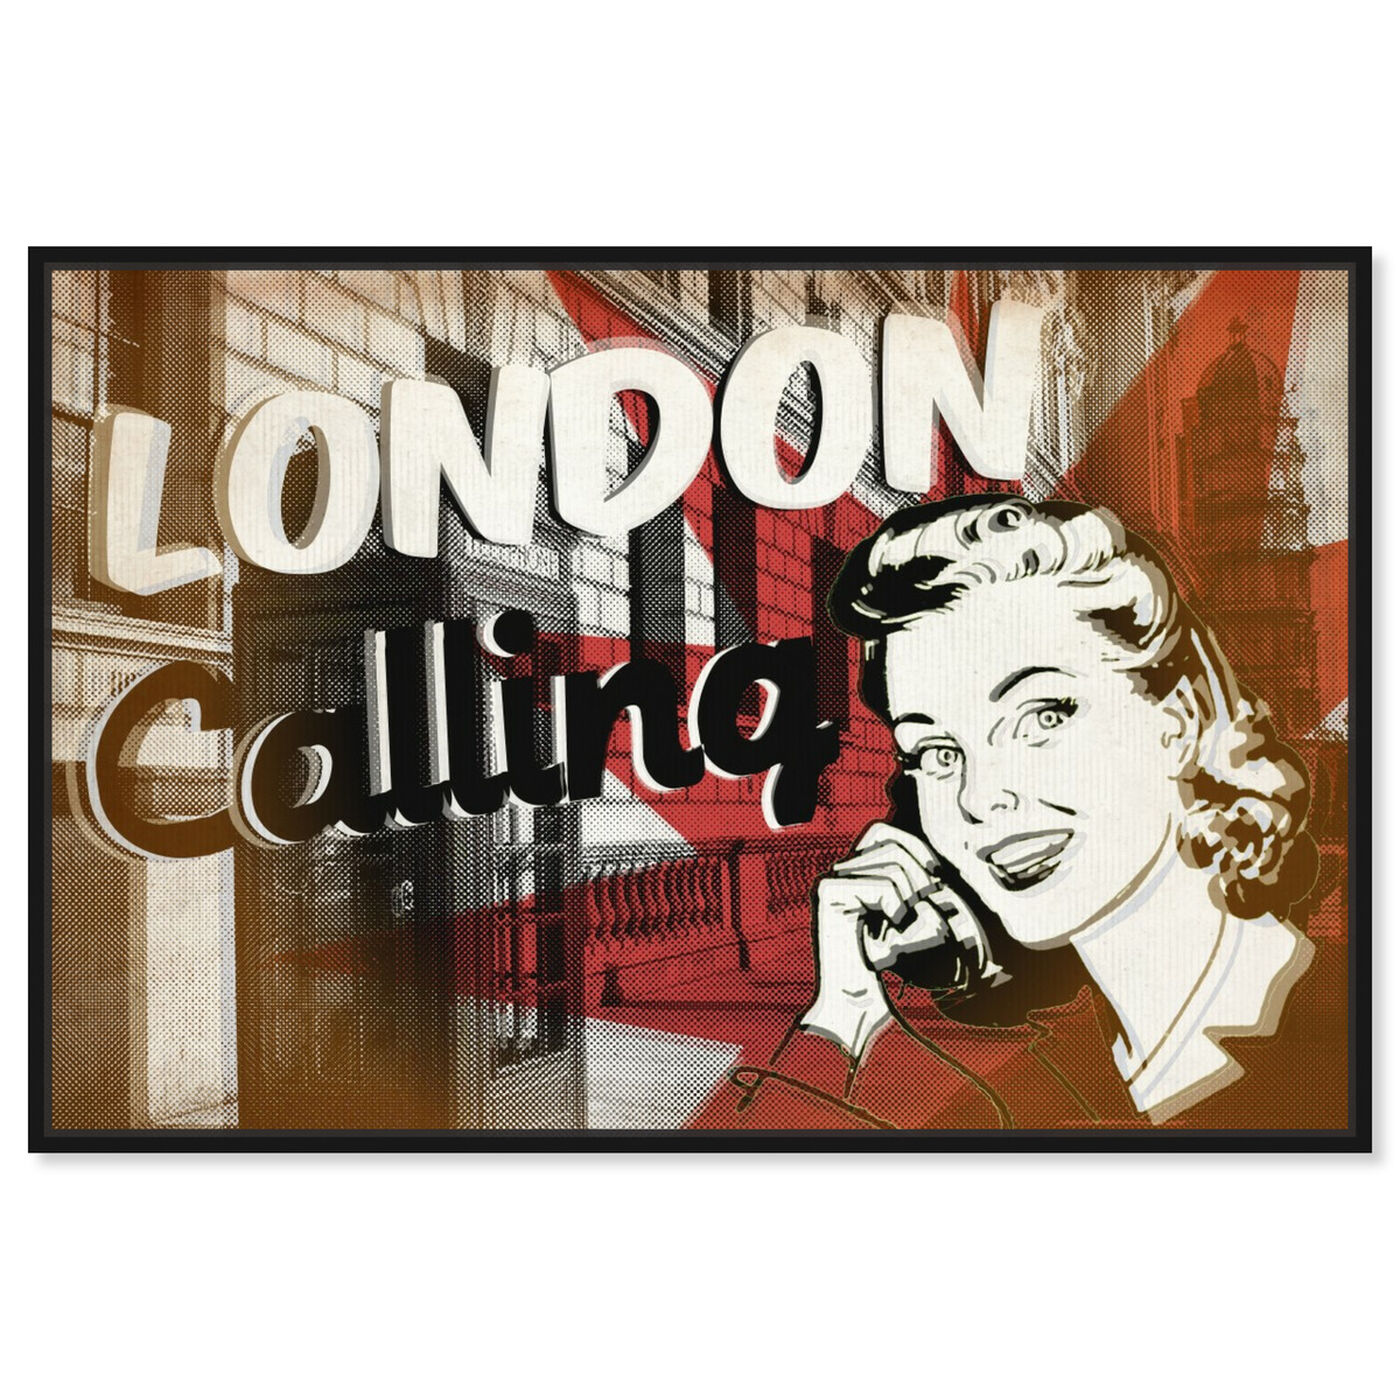 Front view of London Calling featuring advertising and posters art.